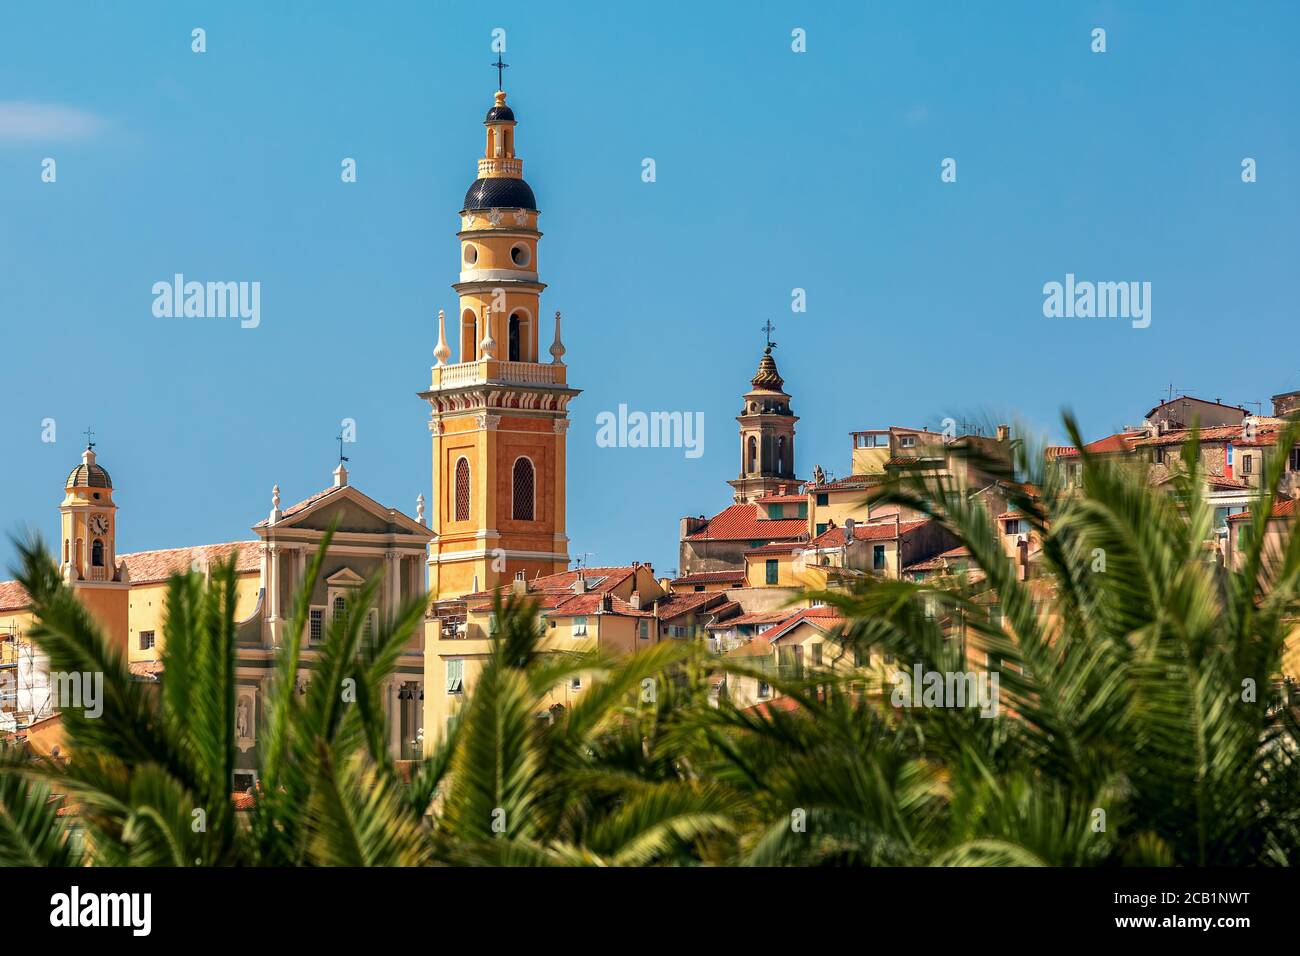 Bell tower of Basilica of Saint Michel Archange under blue sky as seen through the palms in old town of Menton, France. Stock Photo